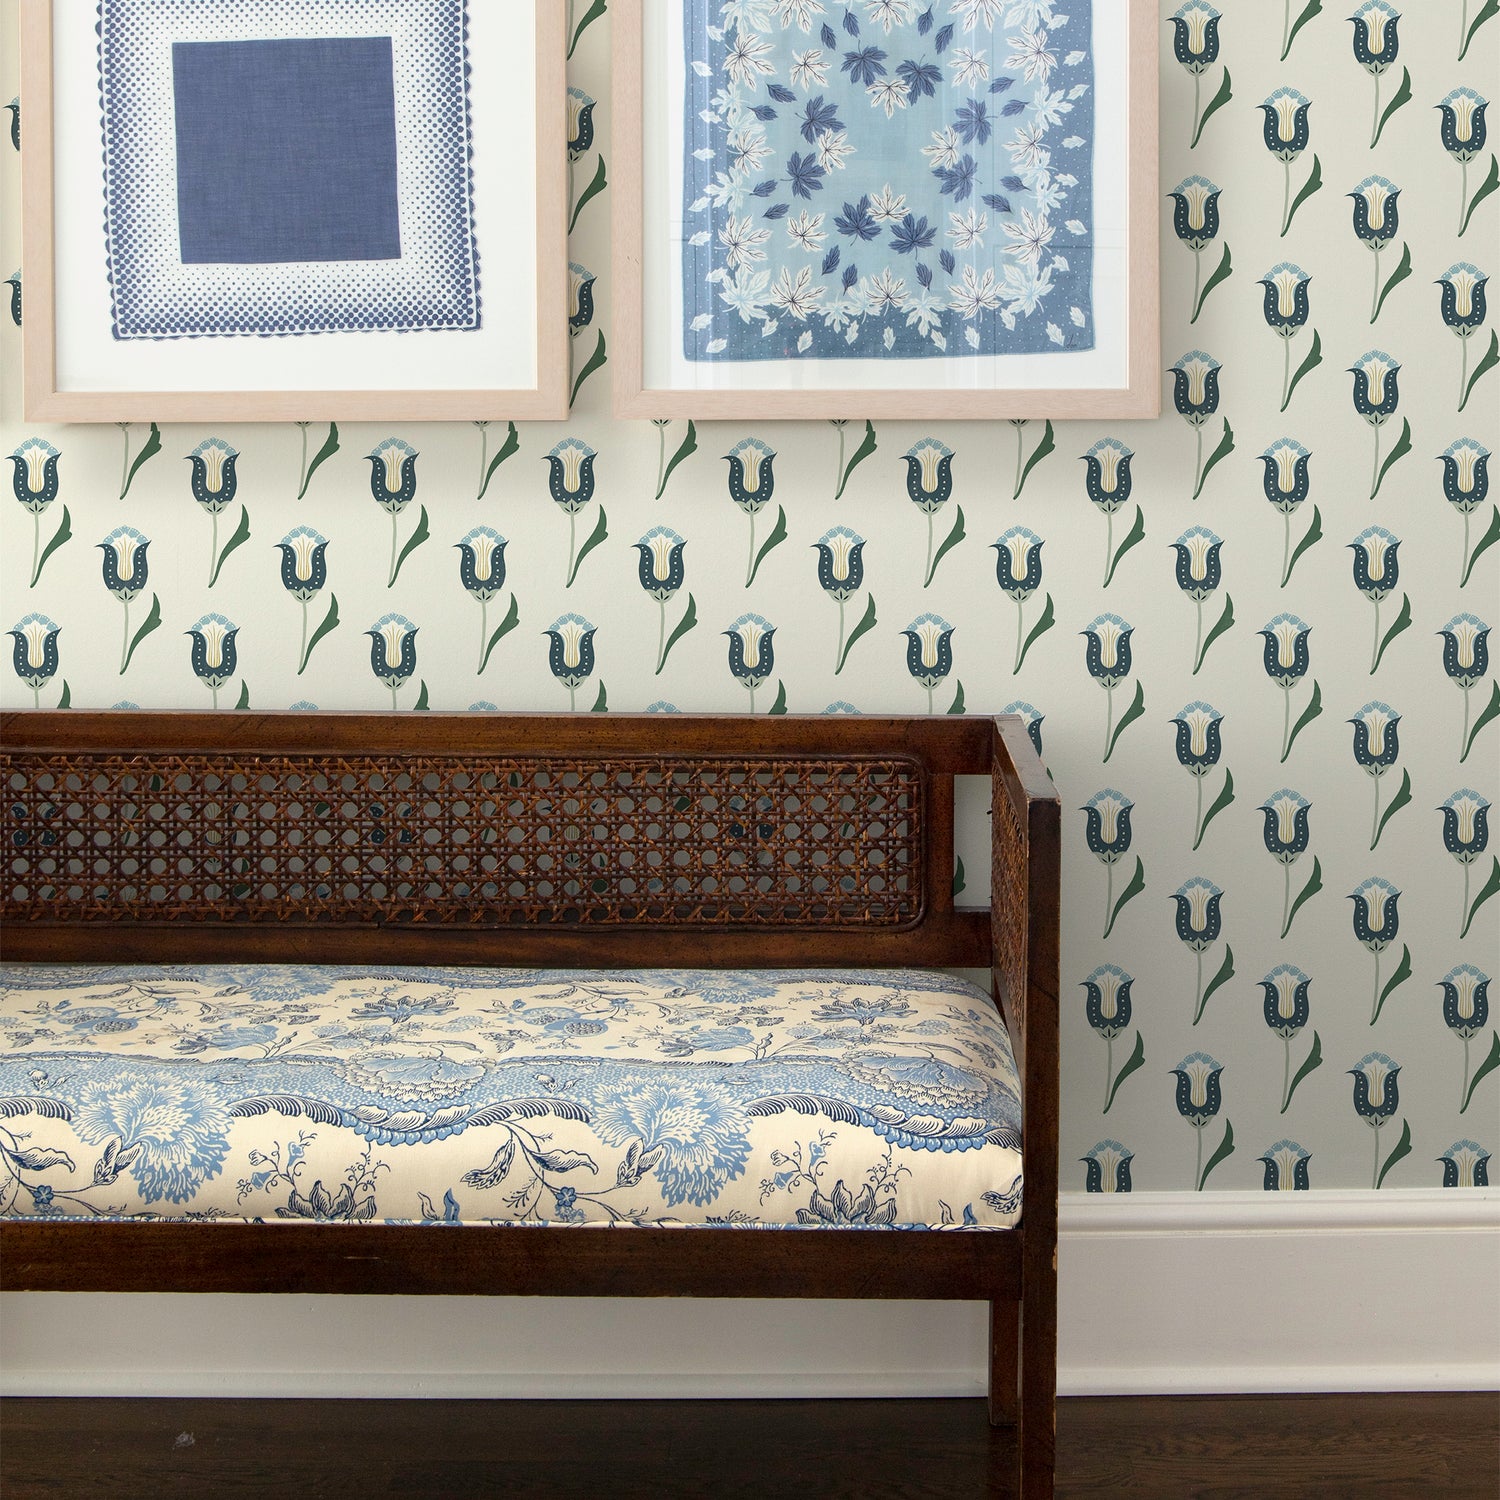 Abstract floral with varying green tones wallpaper on a wall with a brown bench in front with a blue cushion on it and blue framed artwork on the wall